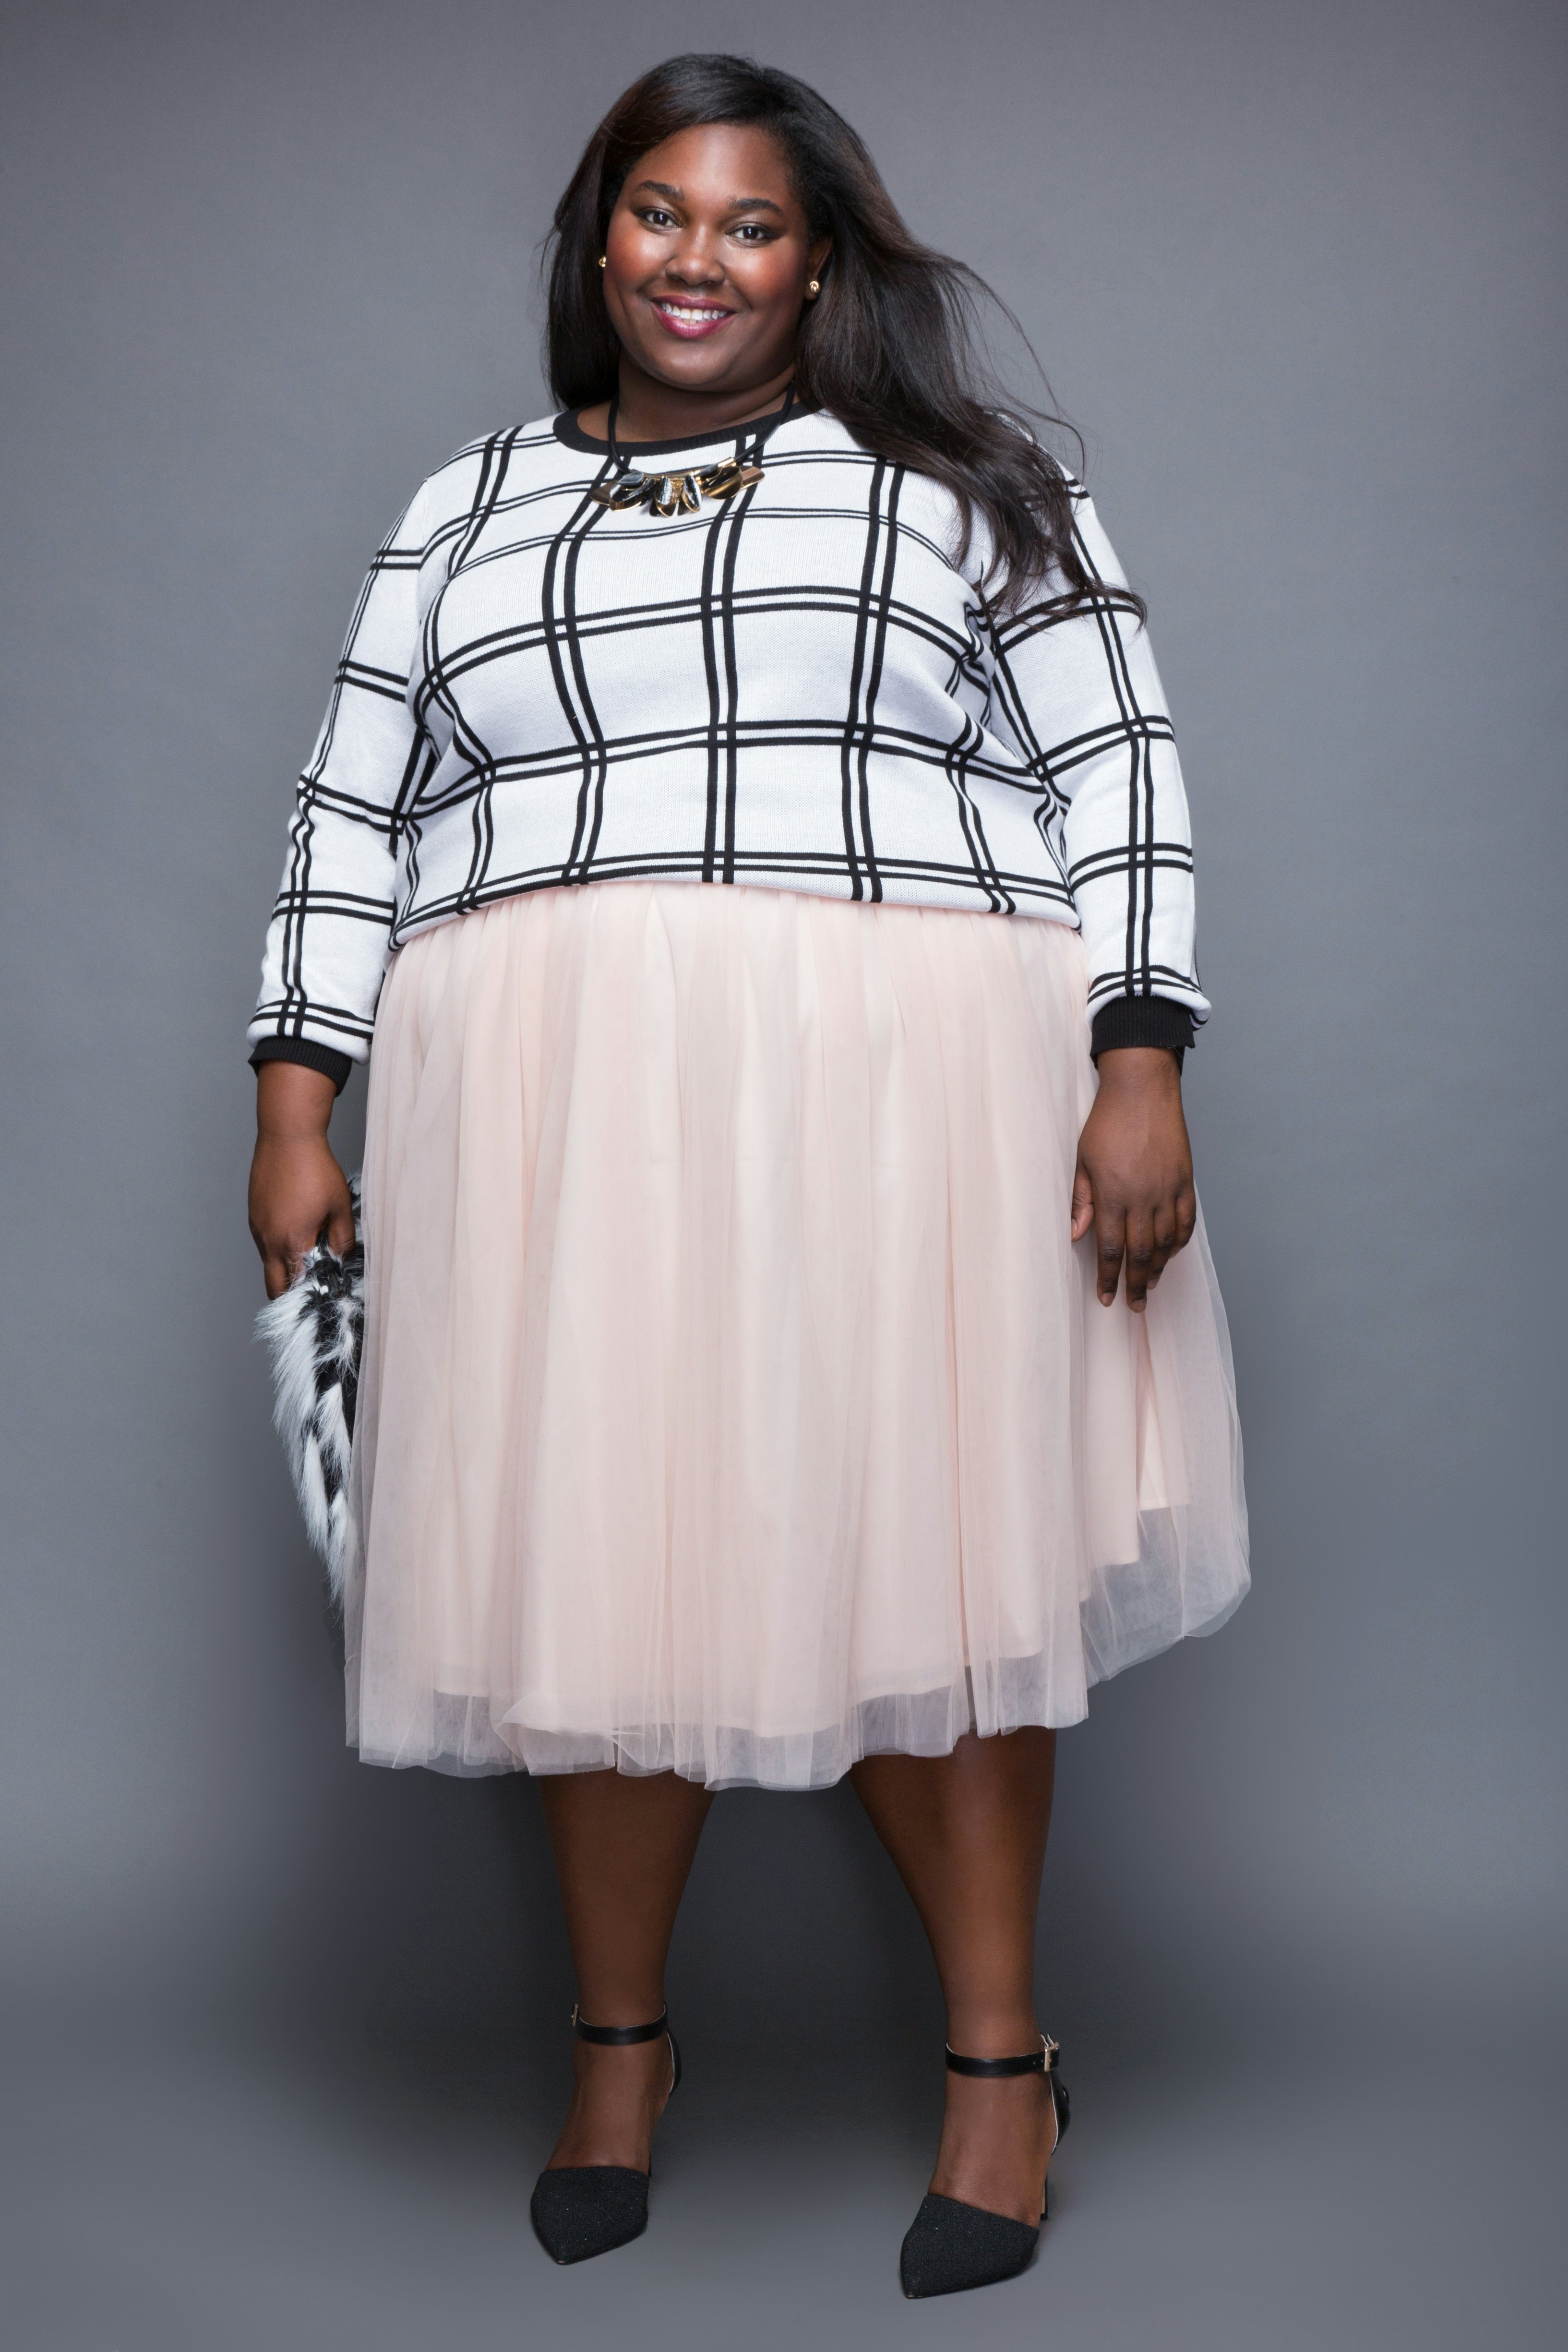 The Top 12 Plus Size Fashion Moments of 2016